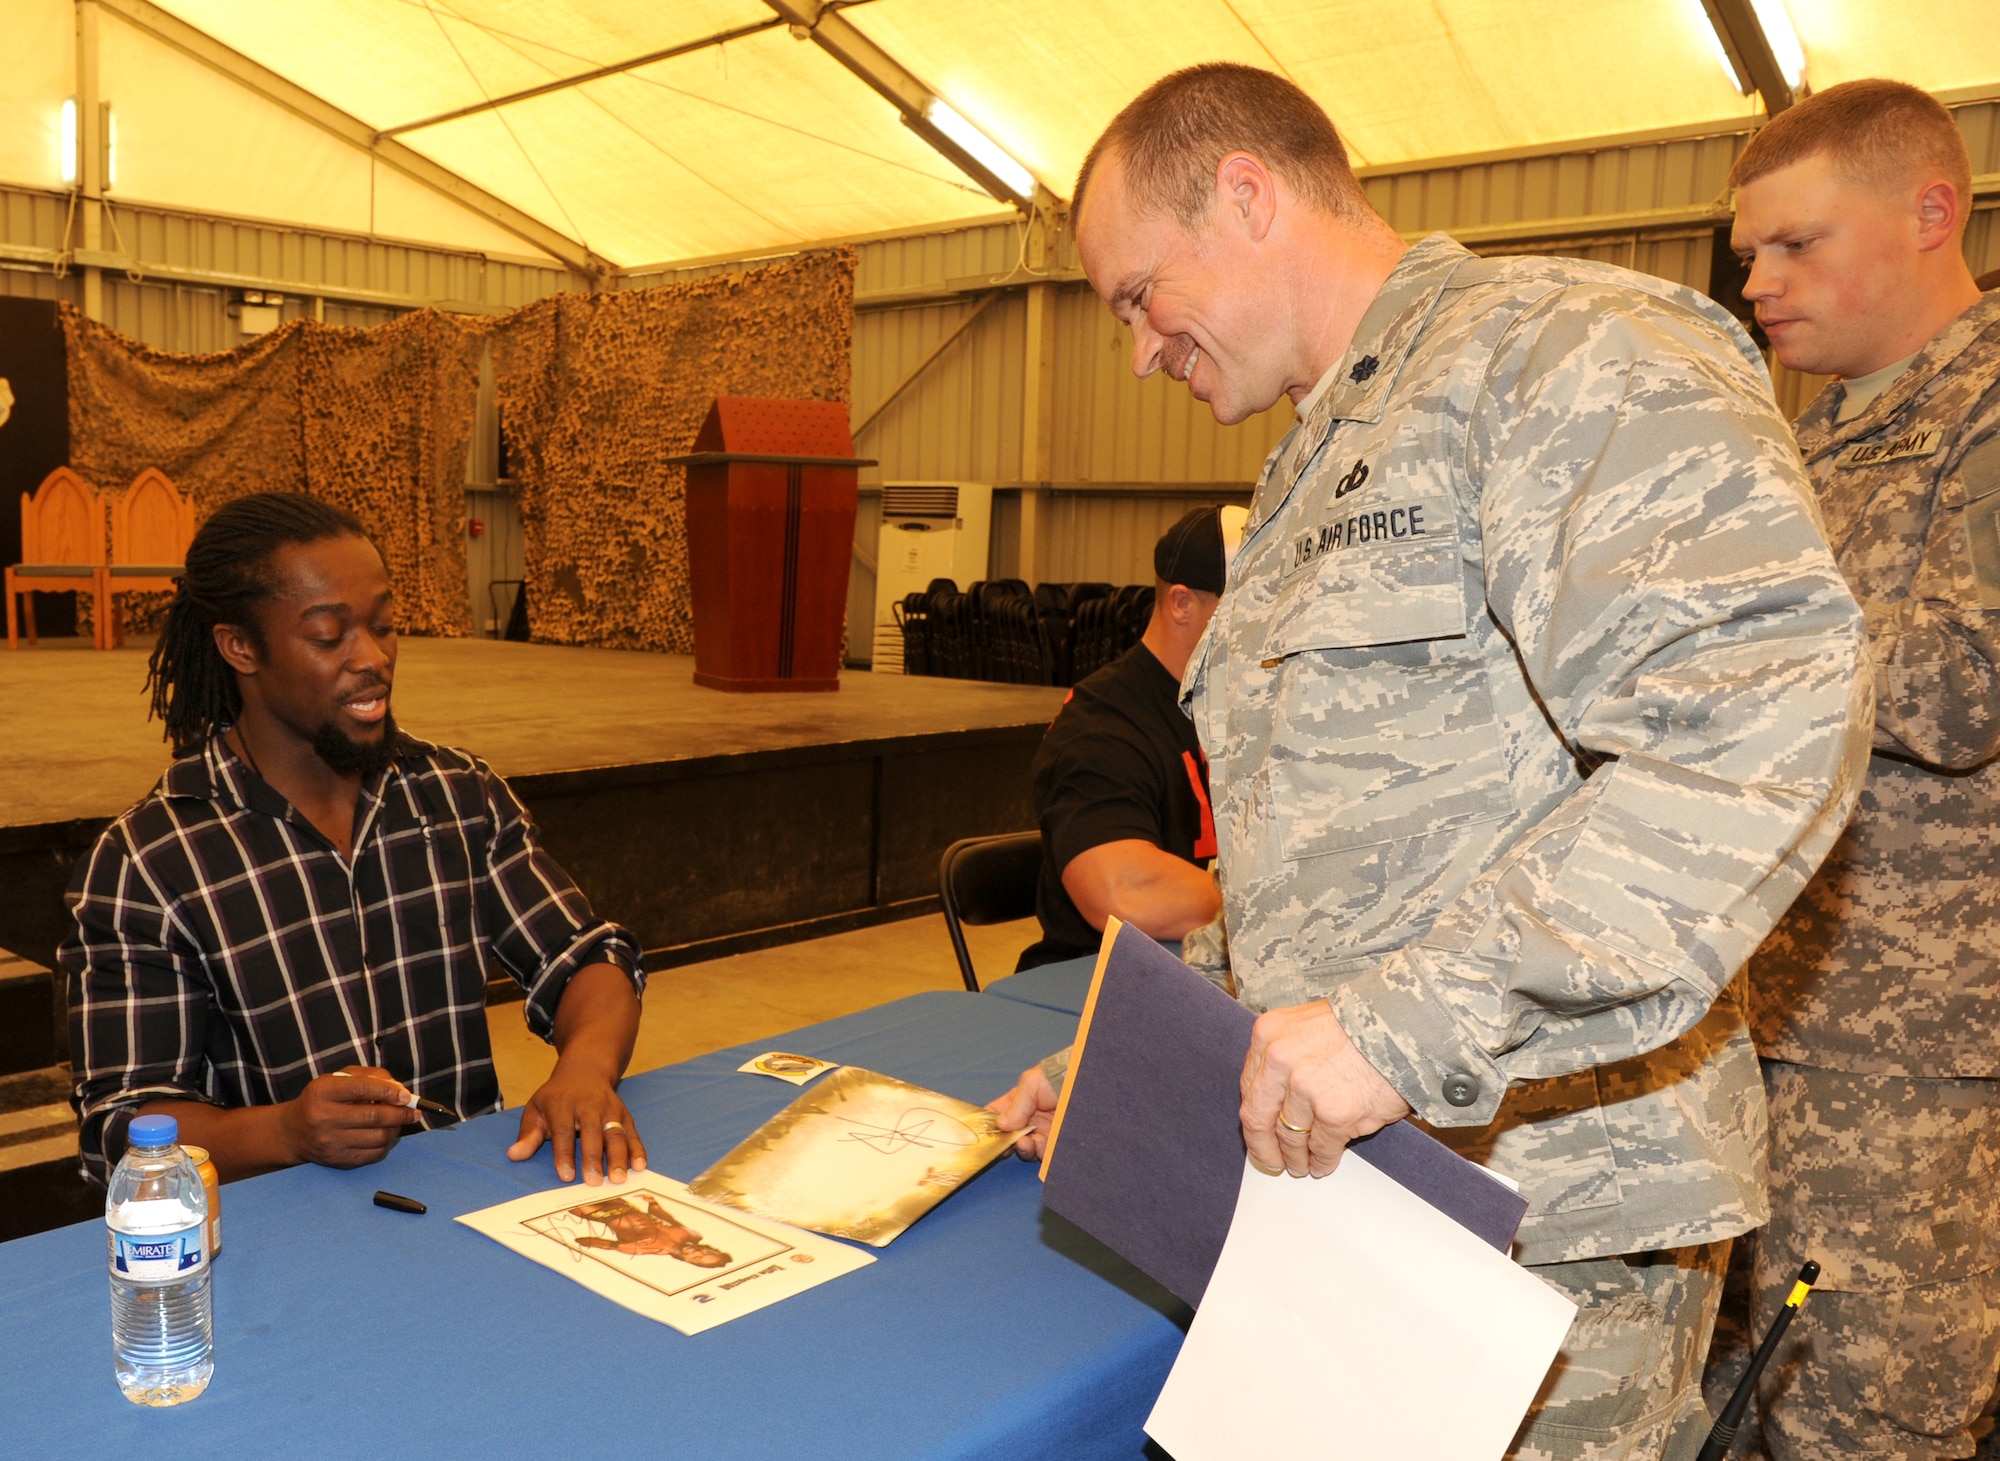 SOUTHWEST ASIA - Lt. Col. Steven Breitfelder gets an autograph from World Wrestling Entertainment superstar Kofi Kingston during a USO visit Feb. 10, 2012. The wrestlers took photos and signed autographs with more than 200 Airmen and Soldiers assigned to the 380th Air Expeditionary Wing. (U.S. Air Force photo/Tech. Sgt. Arian Nead)